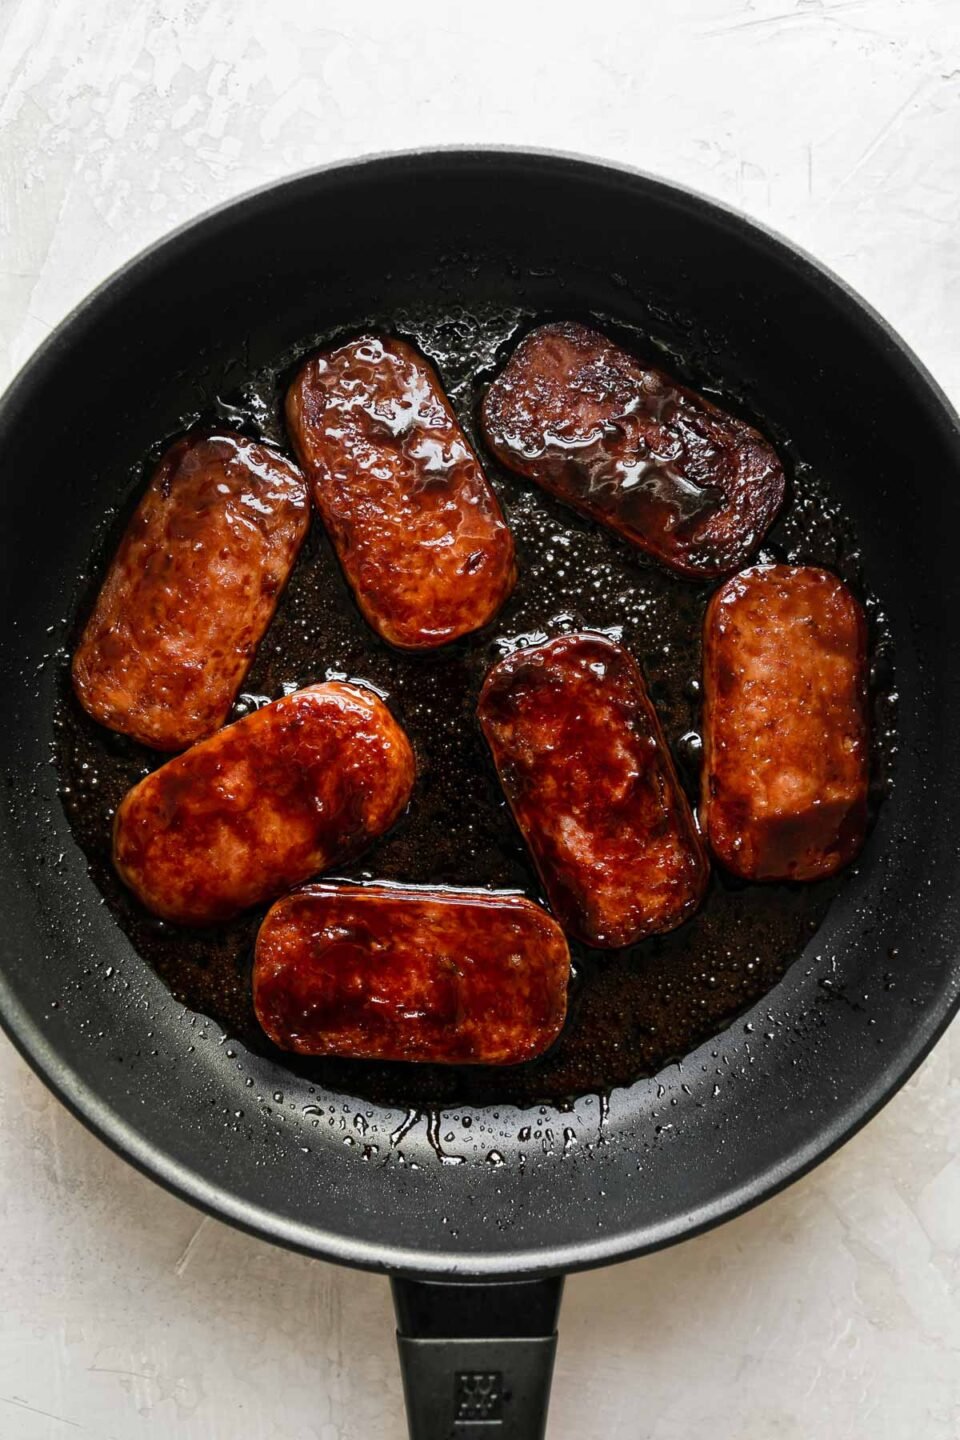 Spam glazed with teriyaki sauce pan fries in a large black skillet. The pan sits atop a creamy white textured surface.